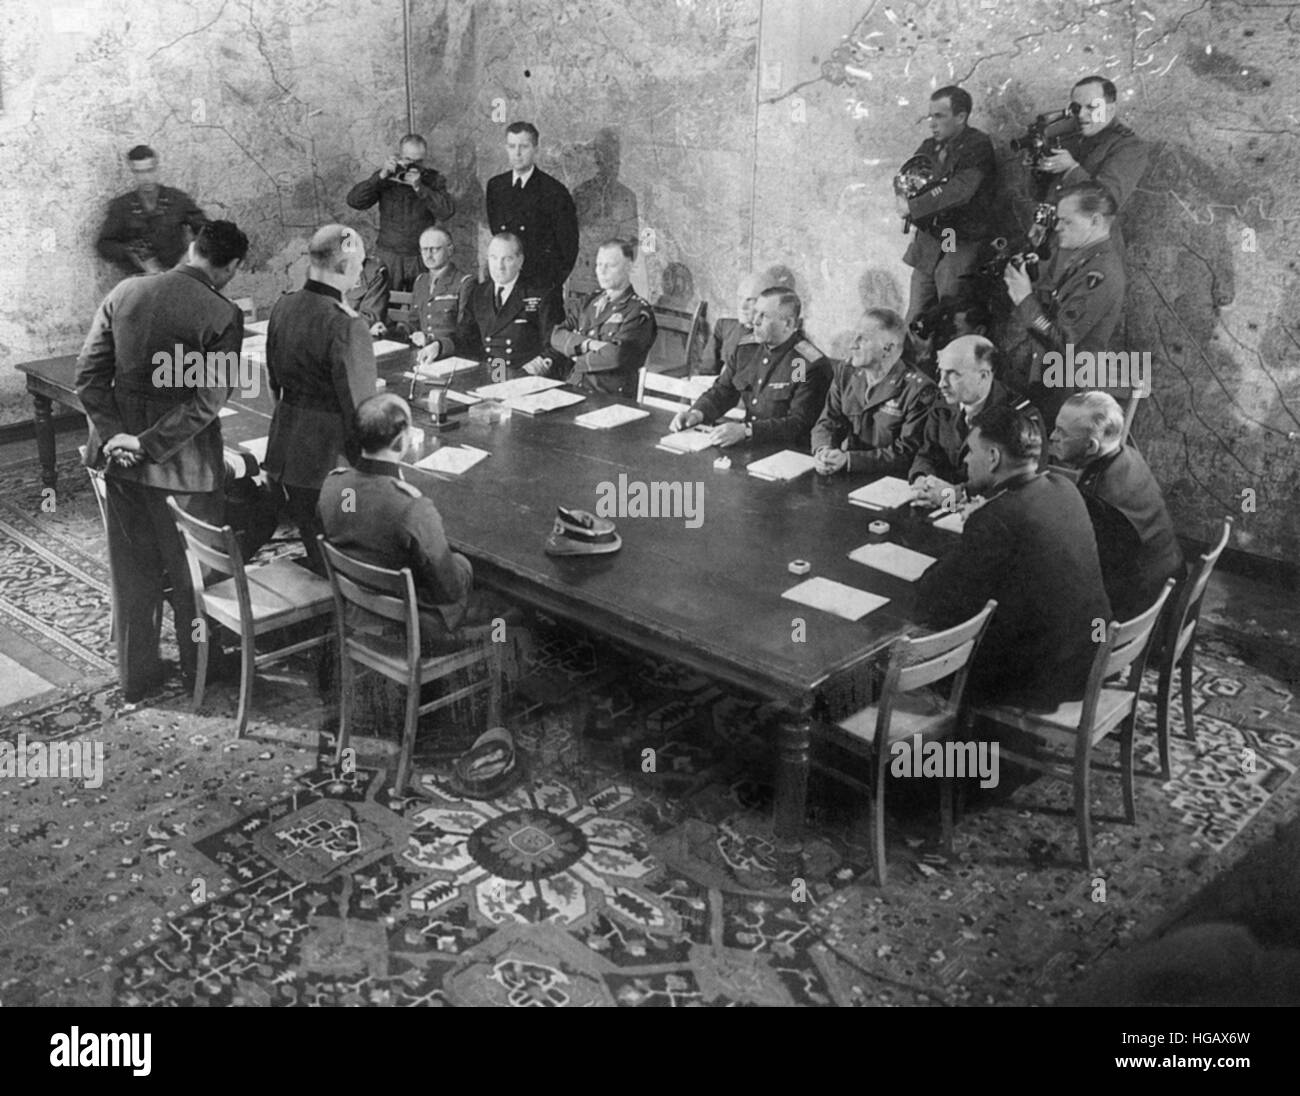 WW2 GERMAN SURRENDER  7 MAY 1945. On behalf of the German High Command General Alfred Jodl prepares to sign the unconditional surrender document at Allied HQ, 12 rue Franklin Roosevelt, Rheims. See Description below. Stock Photo